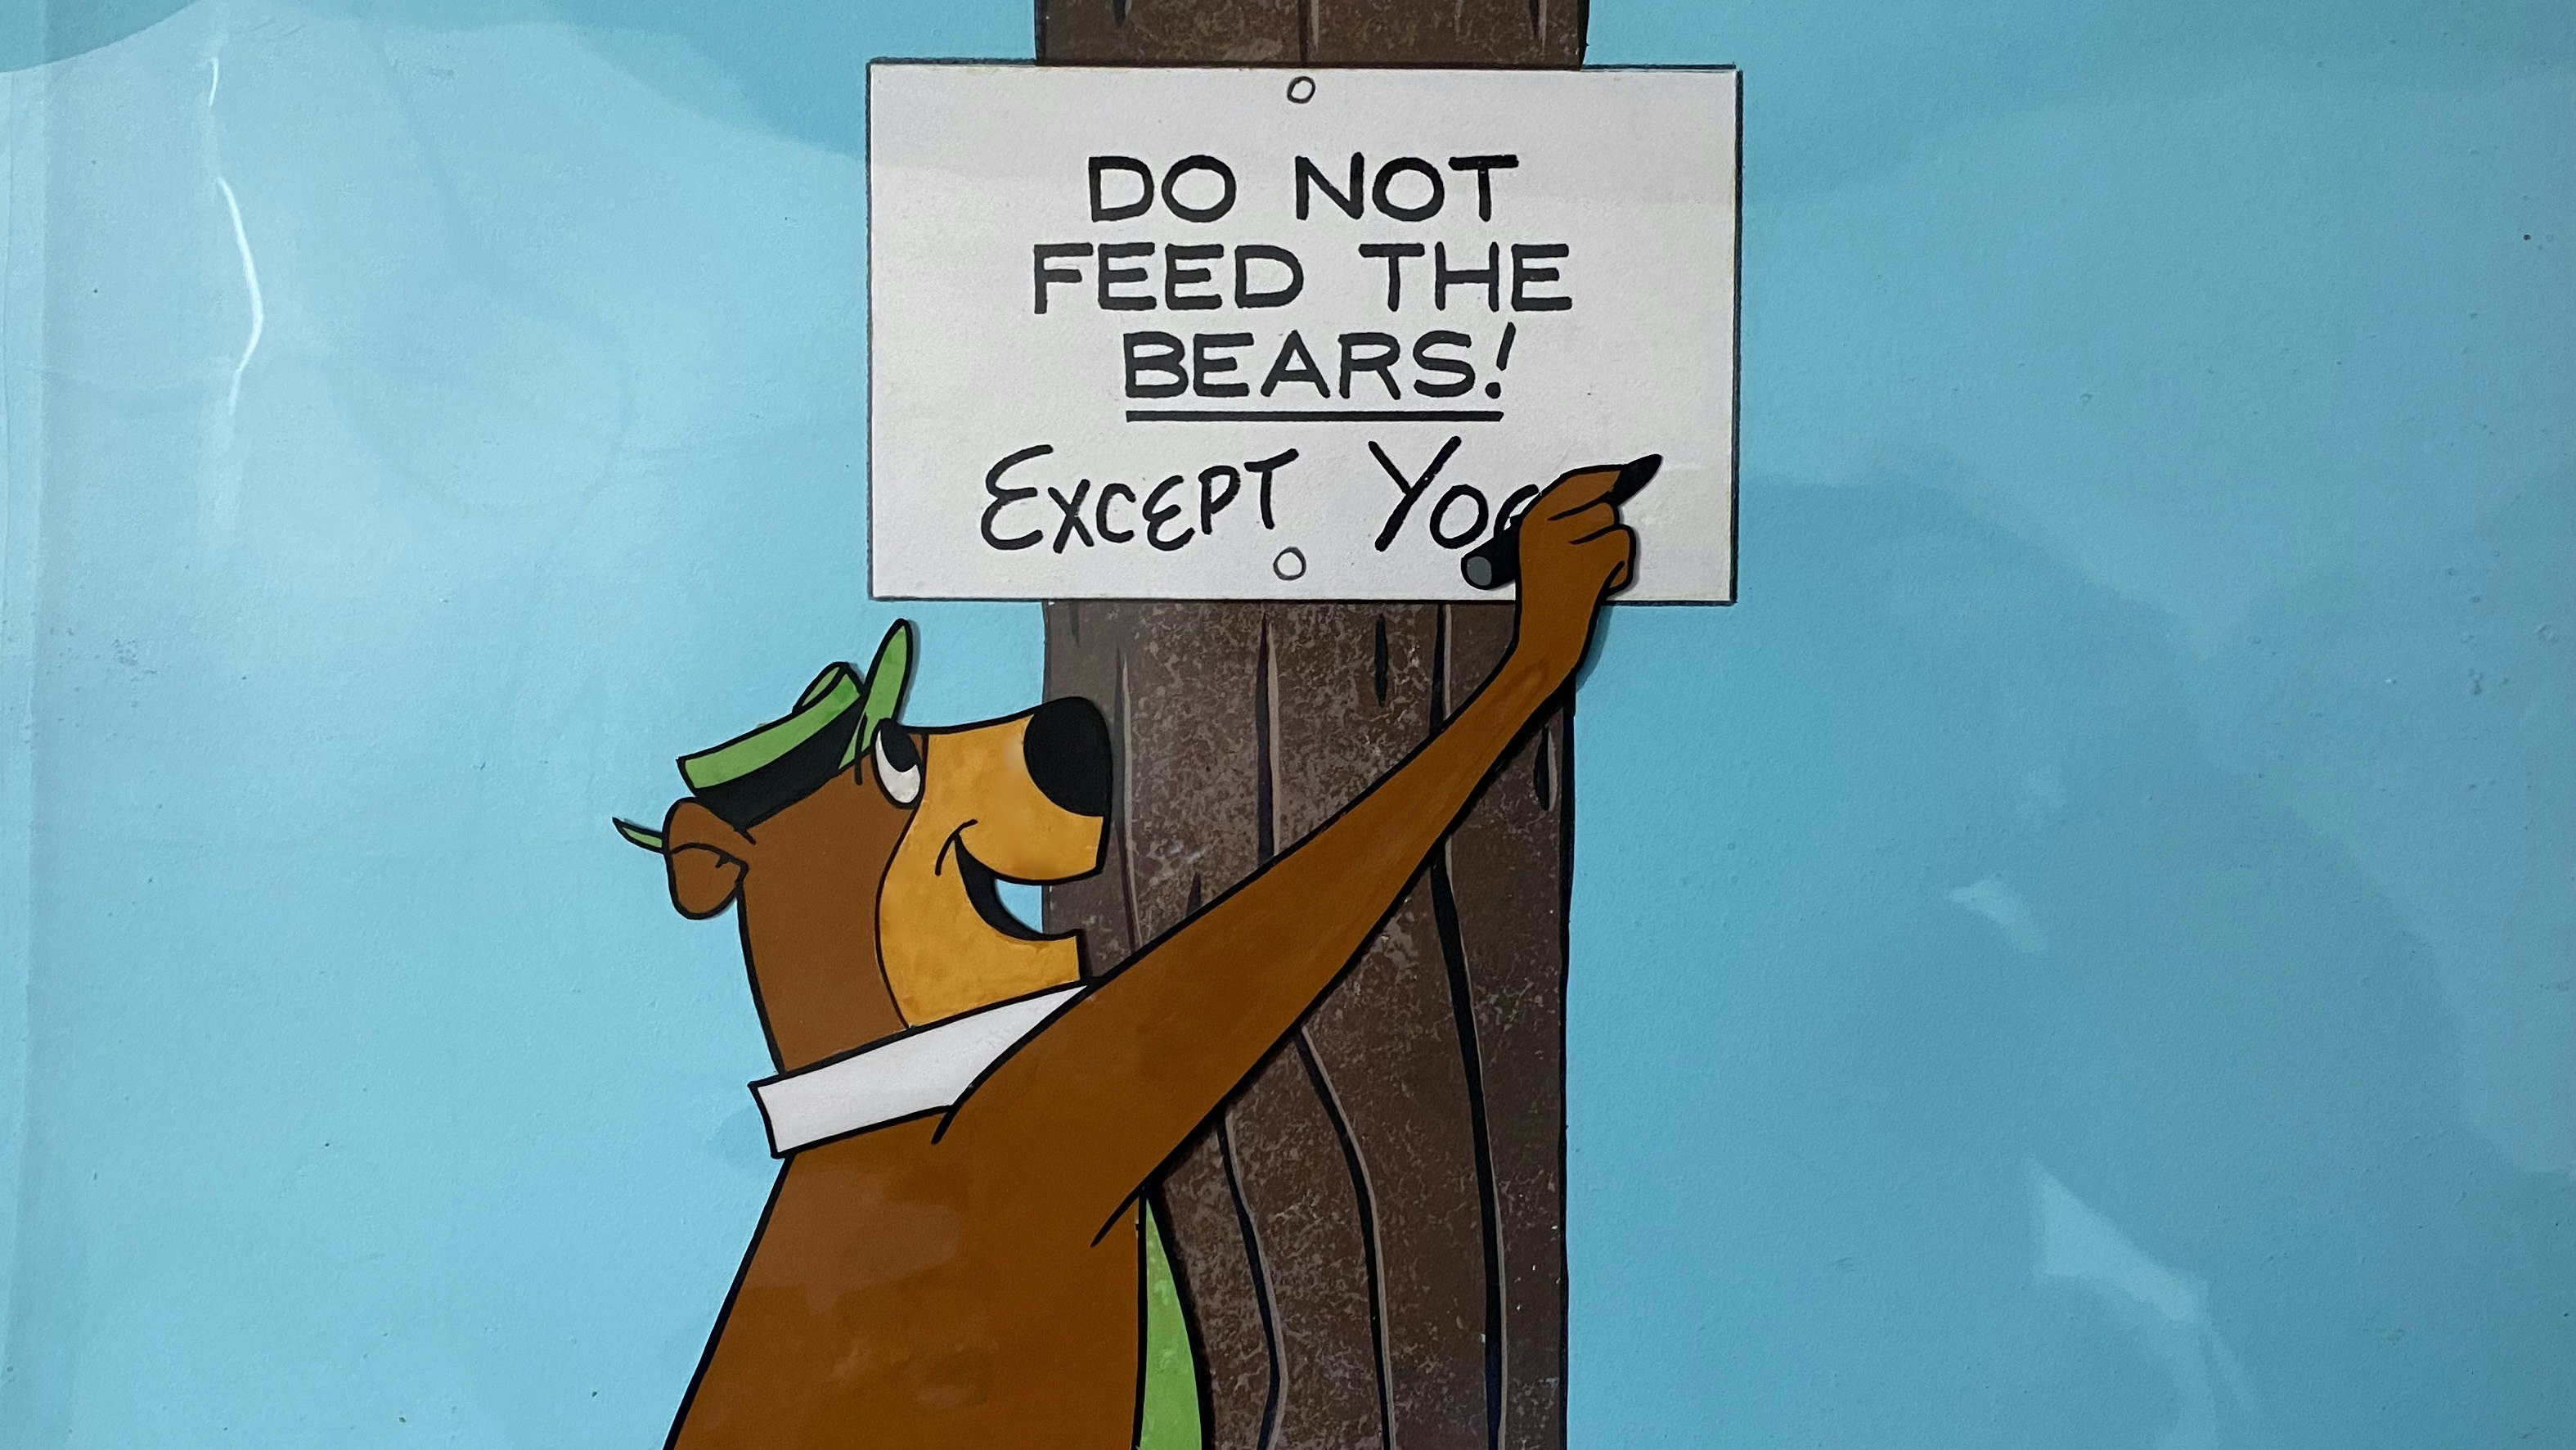 An animation cel from the opening of Hanna Barbera's "The Yogi Bear Show" from 1961. Yogi was a breakout hit for Hanna-Barbera, becoming one of the most popular and iconic cartoon characters of the 1960s.